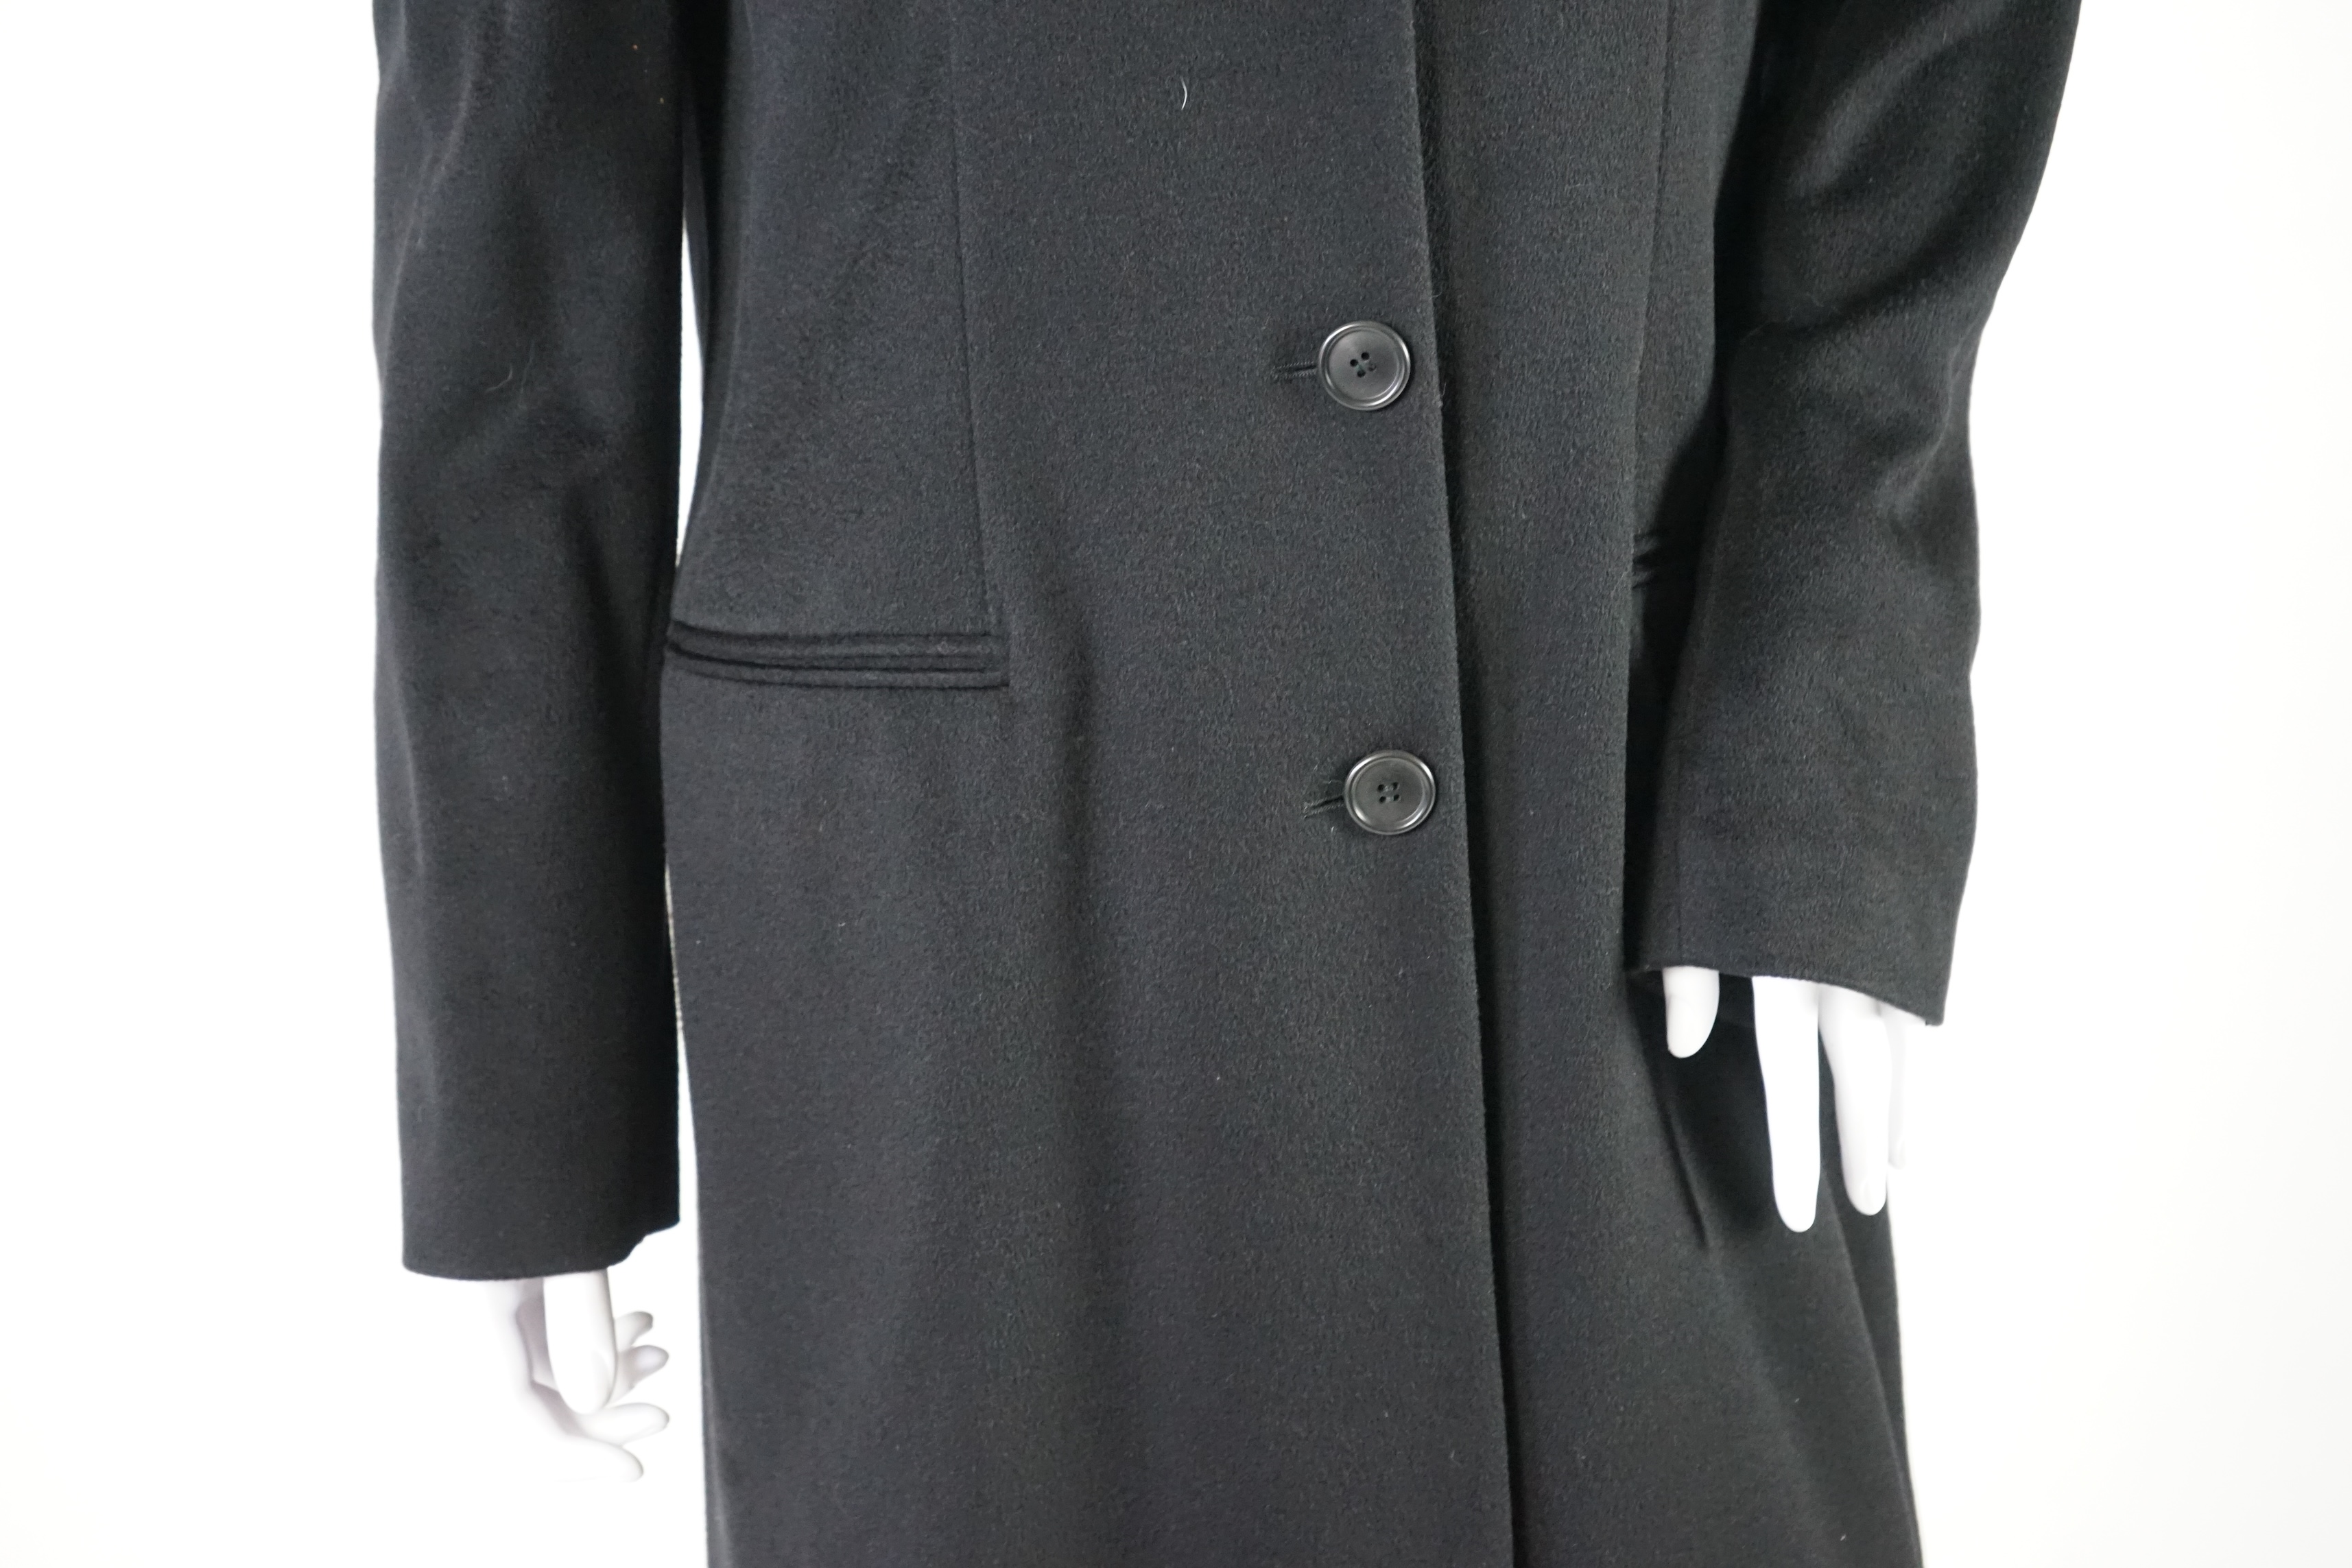 A Georgio Armani Classico lady's black cashmere long coat. Proceeds to Happy Paws Puppy Rescue